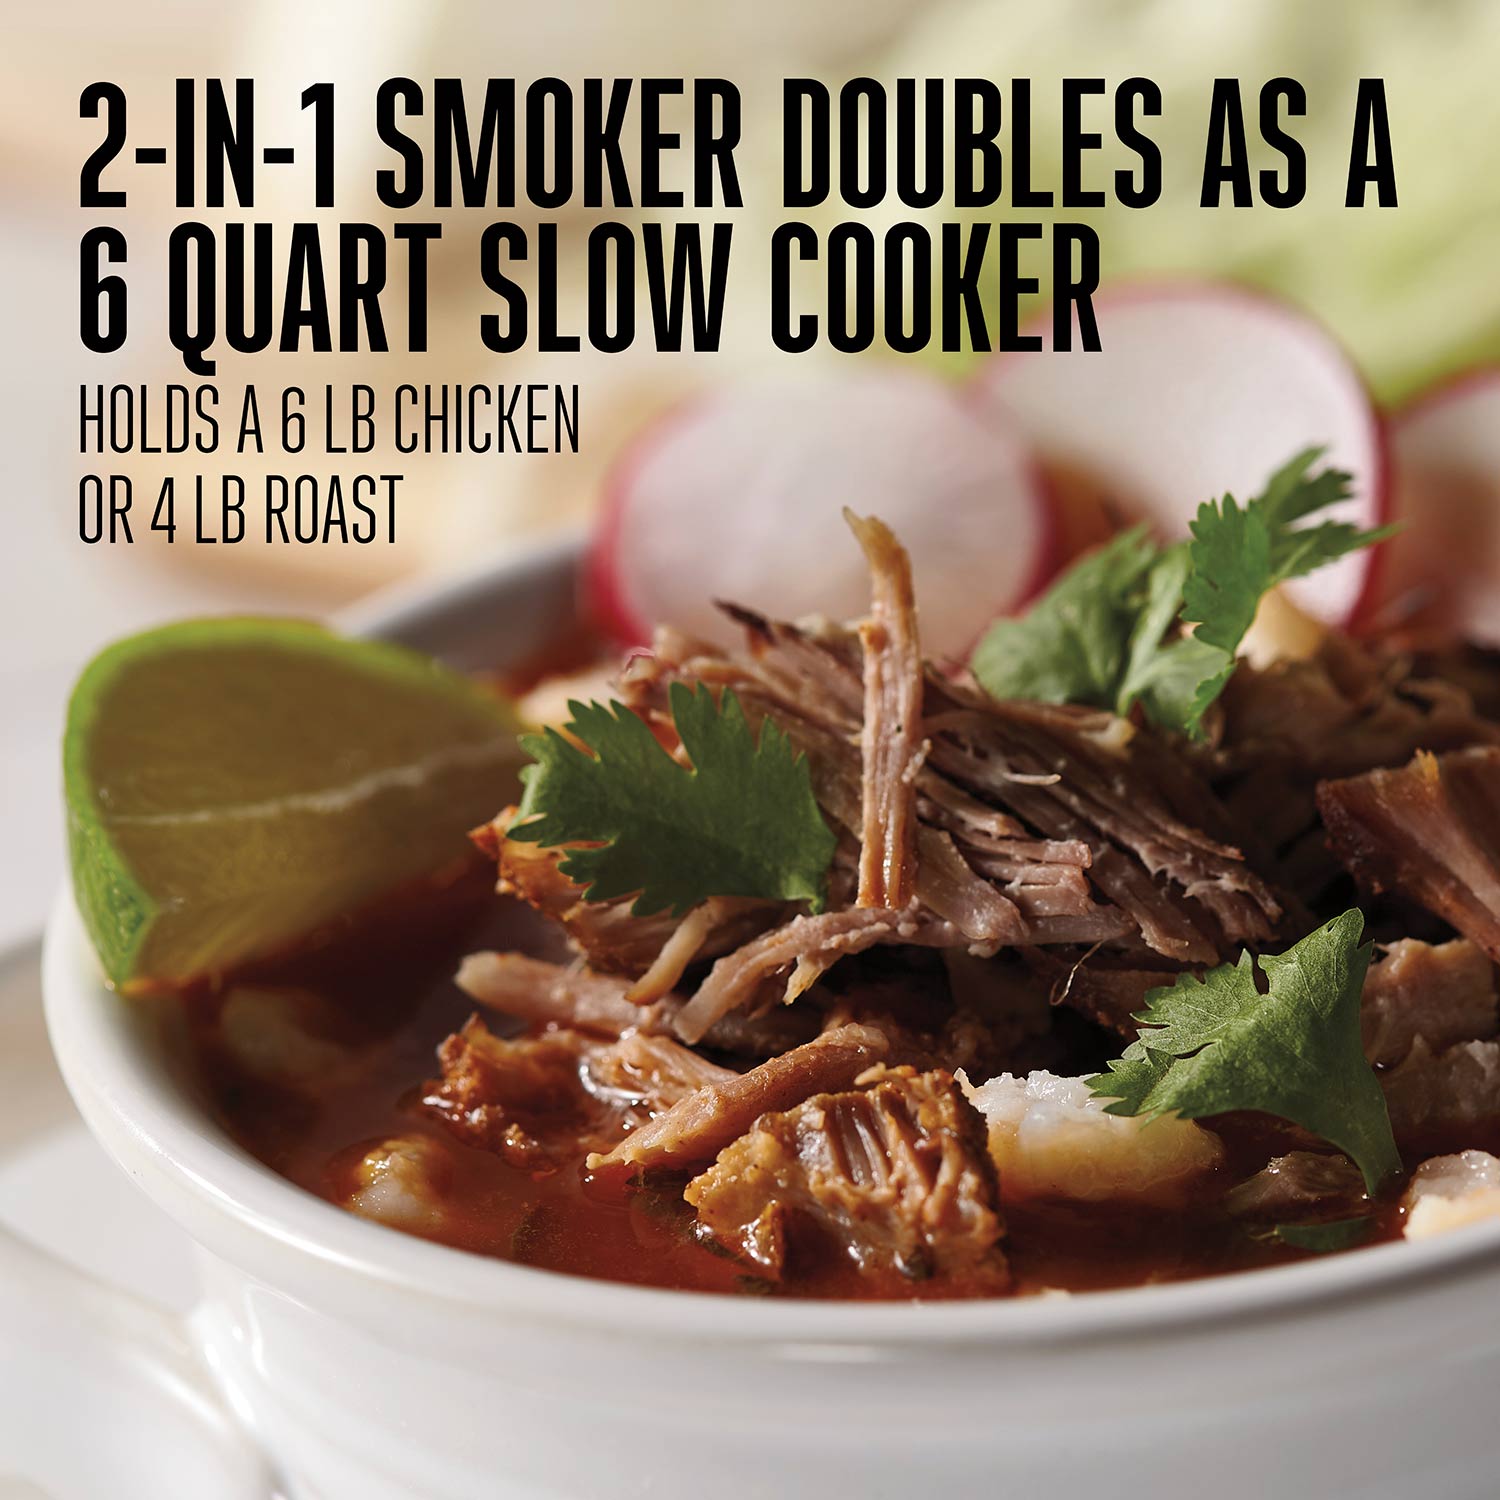 WESTON SC87 Indoor Smoker and Slow Cooker Instruction Manual